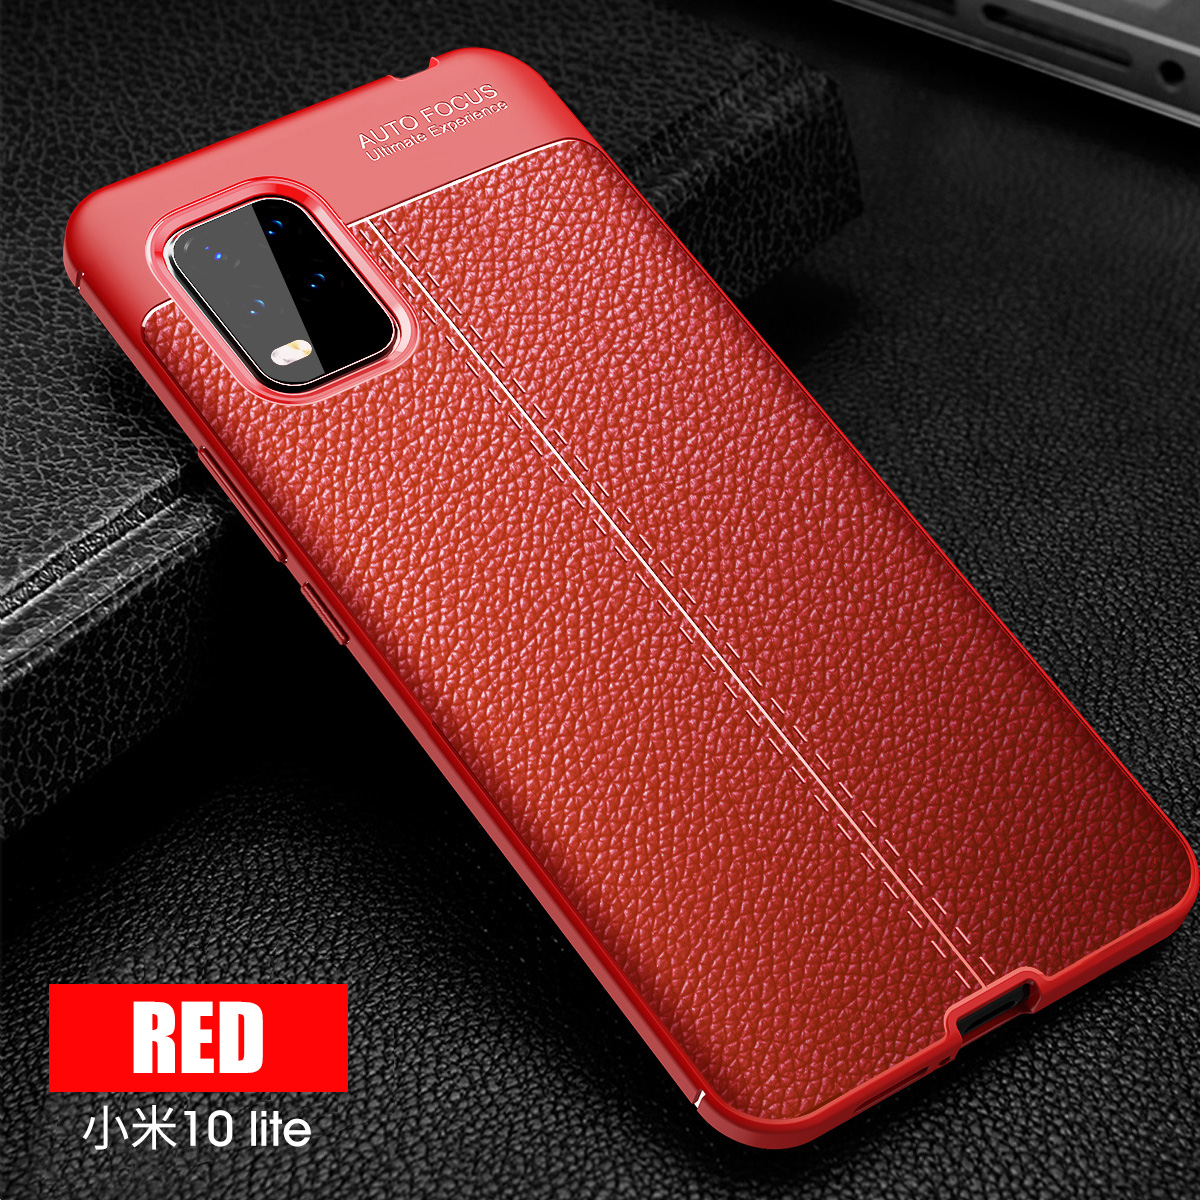 Bakeey-for-Xiaomi-Mi-10-Lite-Case-Litchi-Pattern-Shockproof-PU-Leather-TPU-Soft-Protective-Case-Back-1708407-7